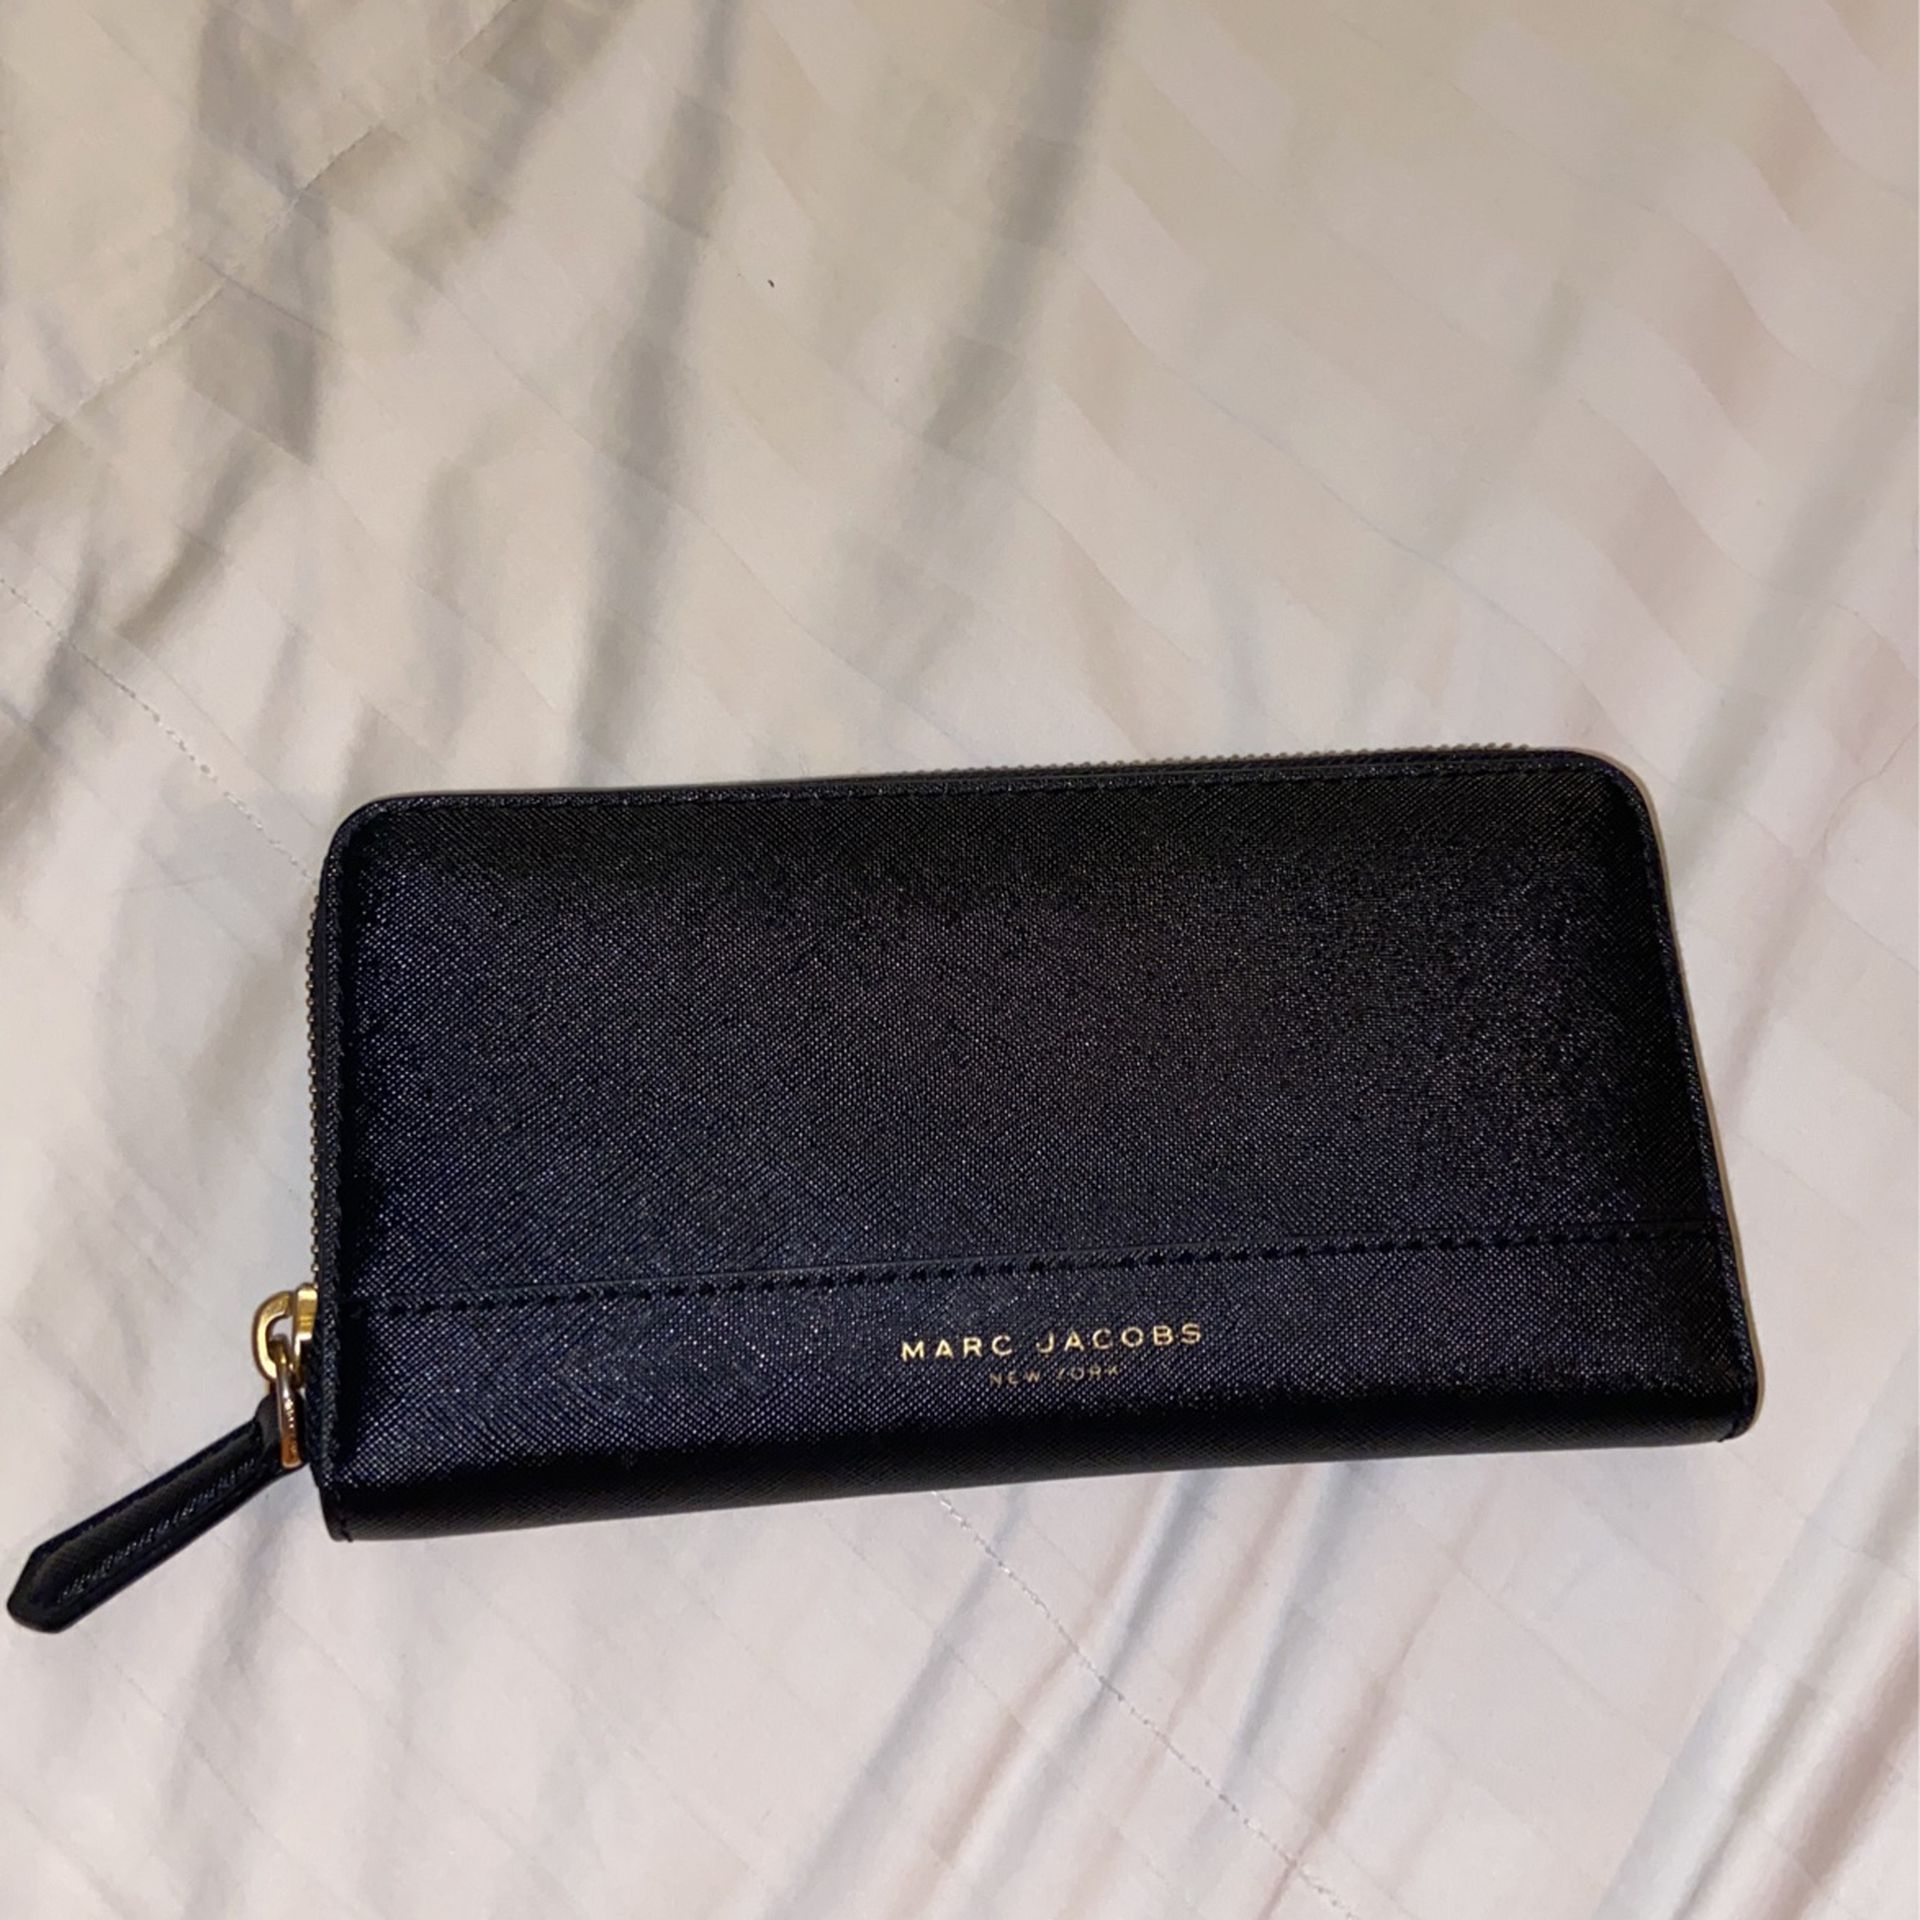 MARC JACOBS Wallet In Excellent Condition 